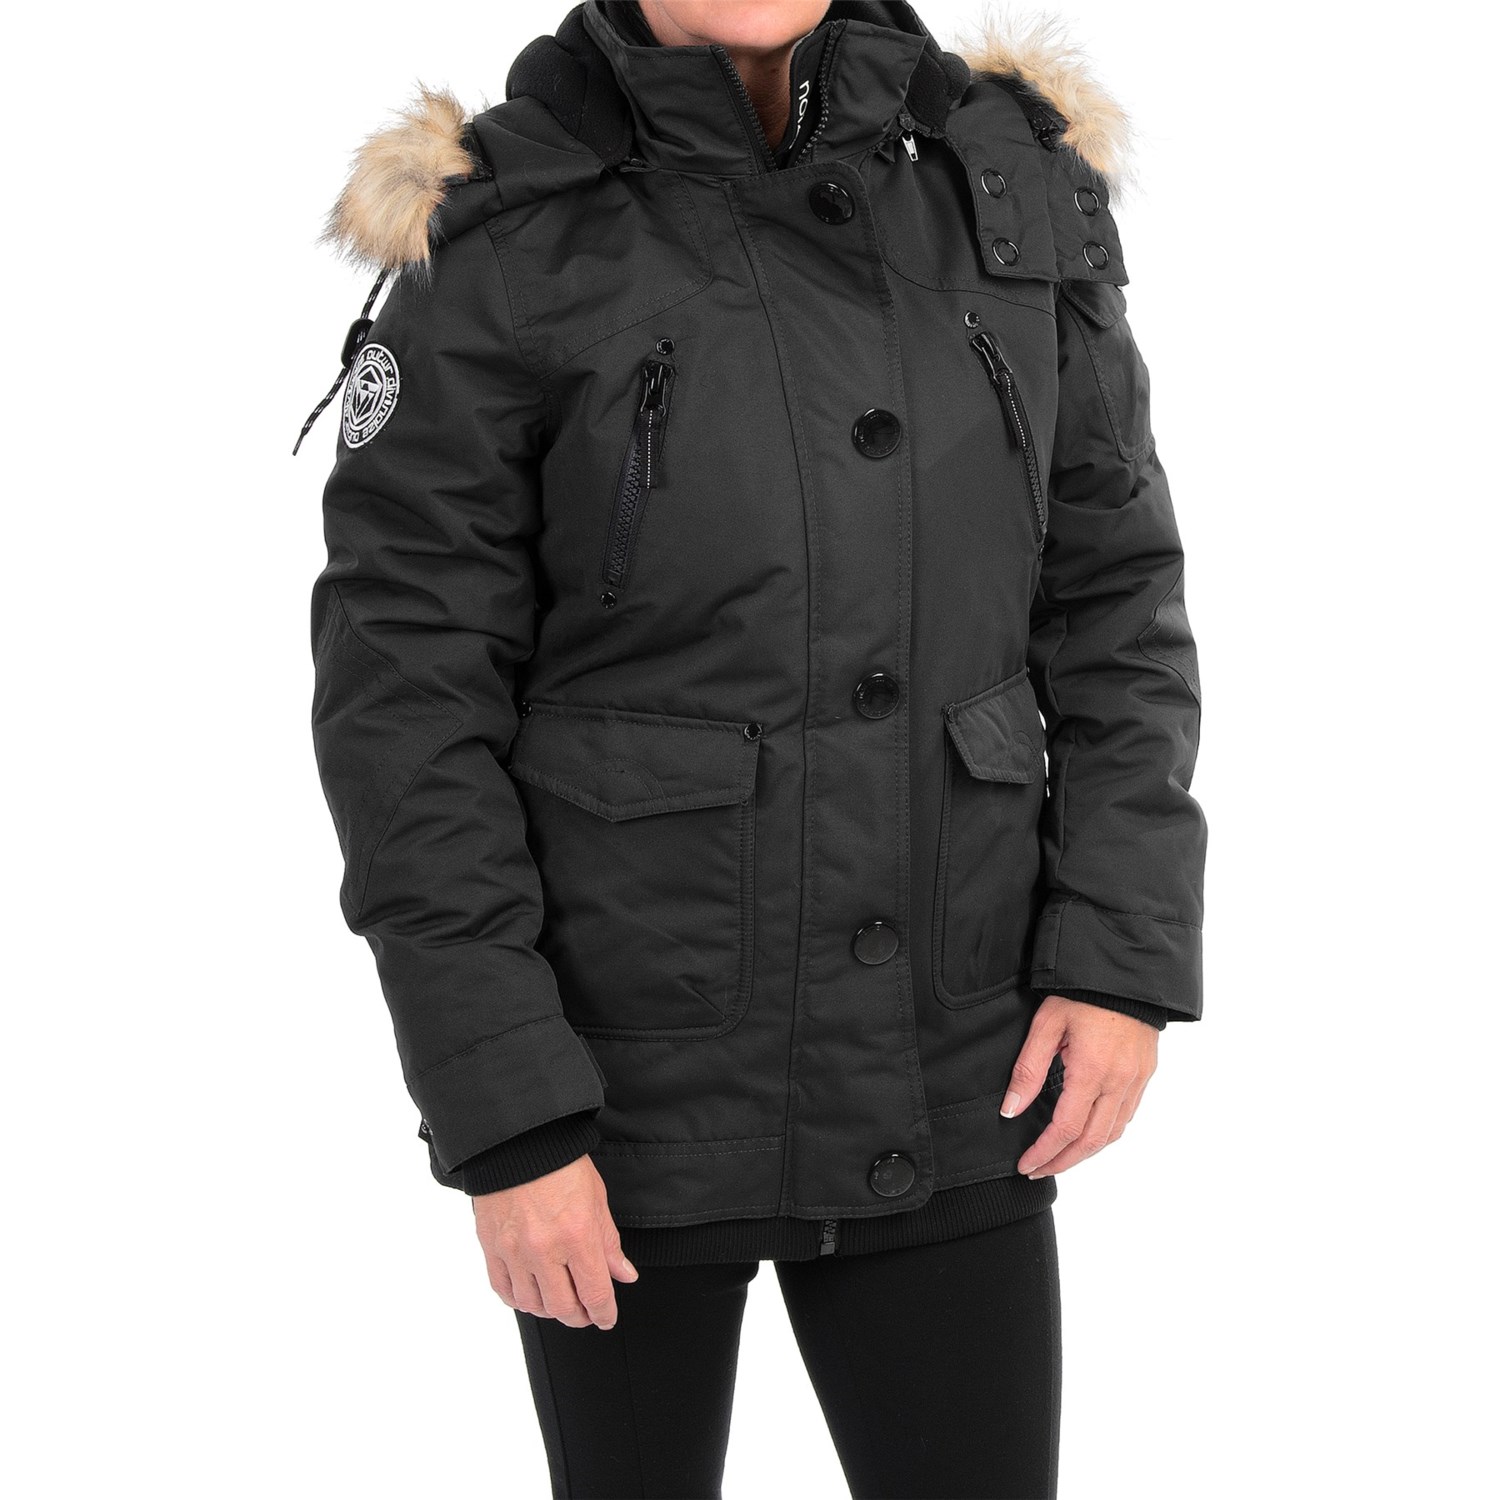 Noize Borge 15 Insulated Parka (For Women) 9479X - Save 76%